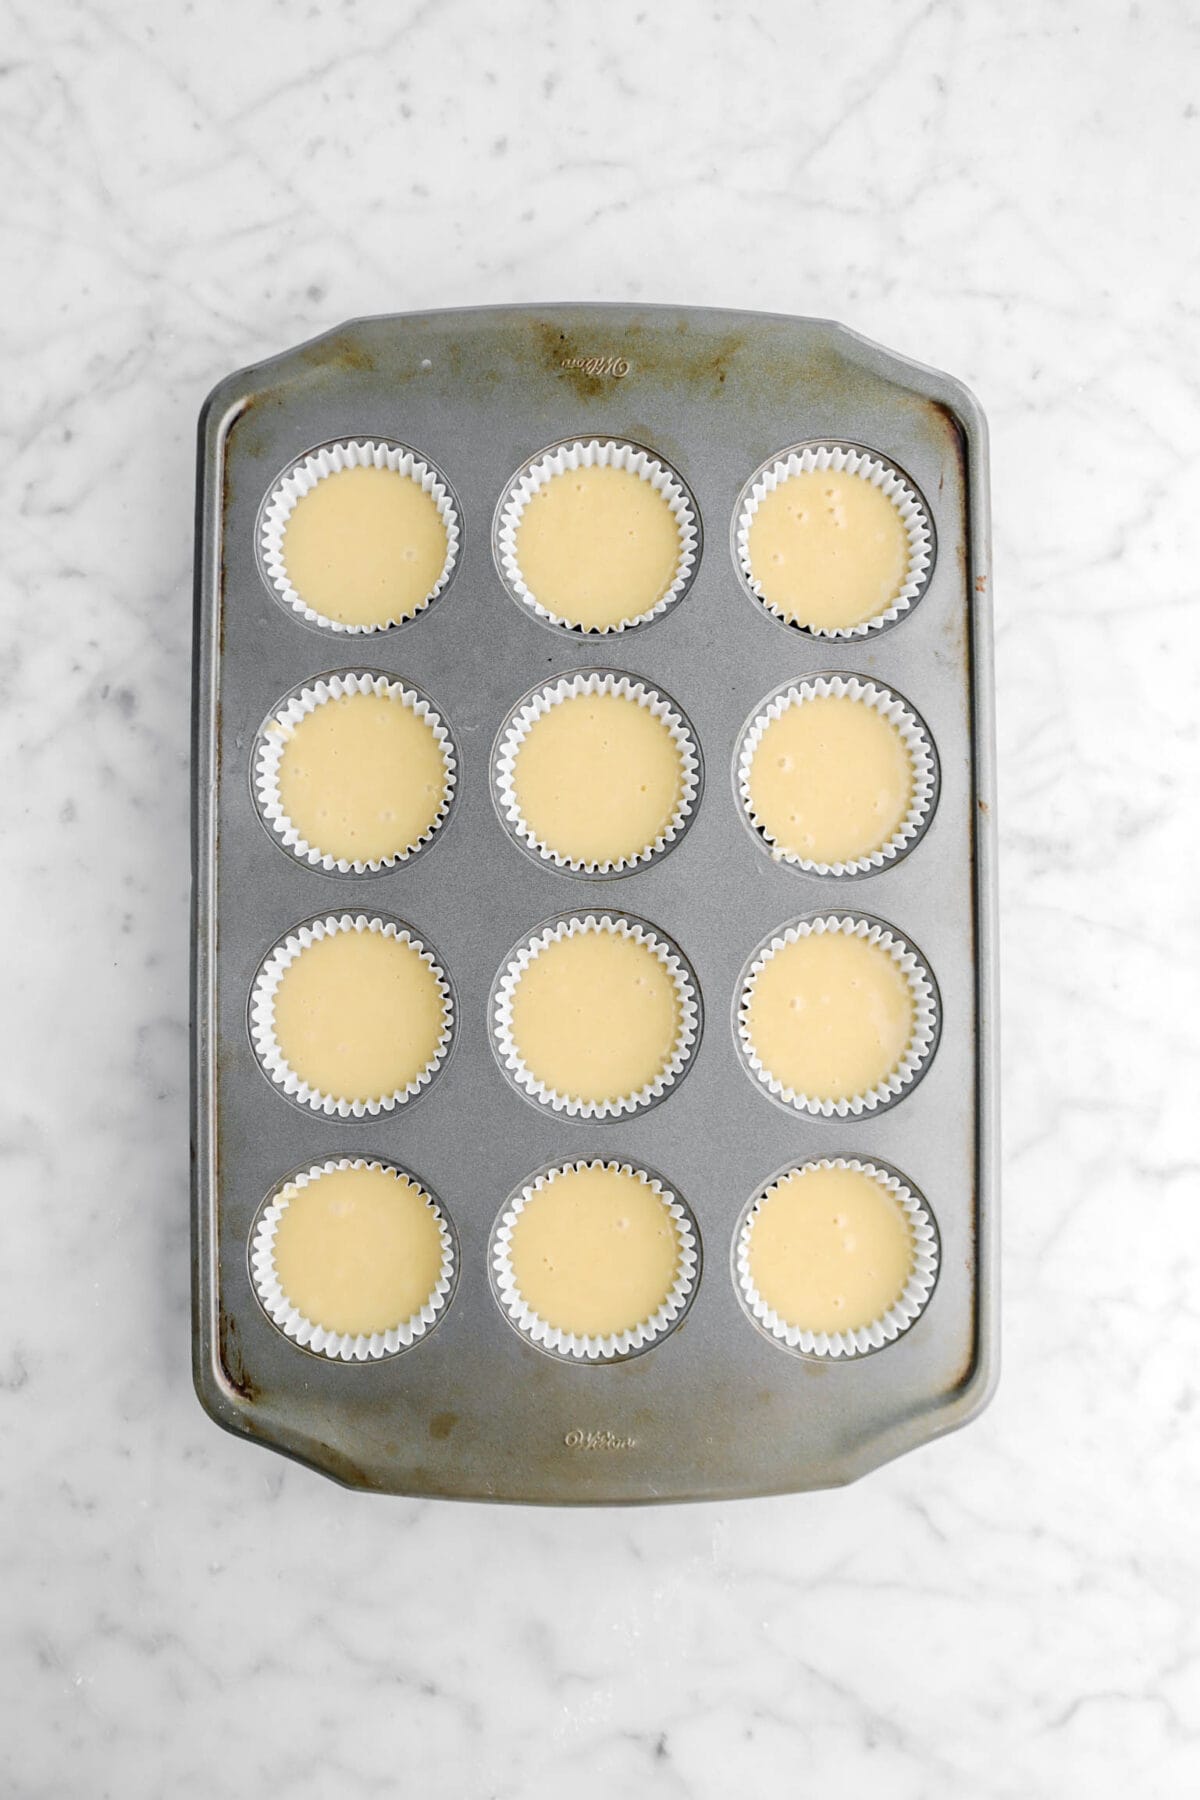 cupcake batter in lined cupcake pan on marble surface